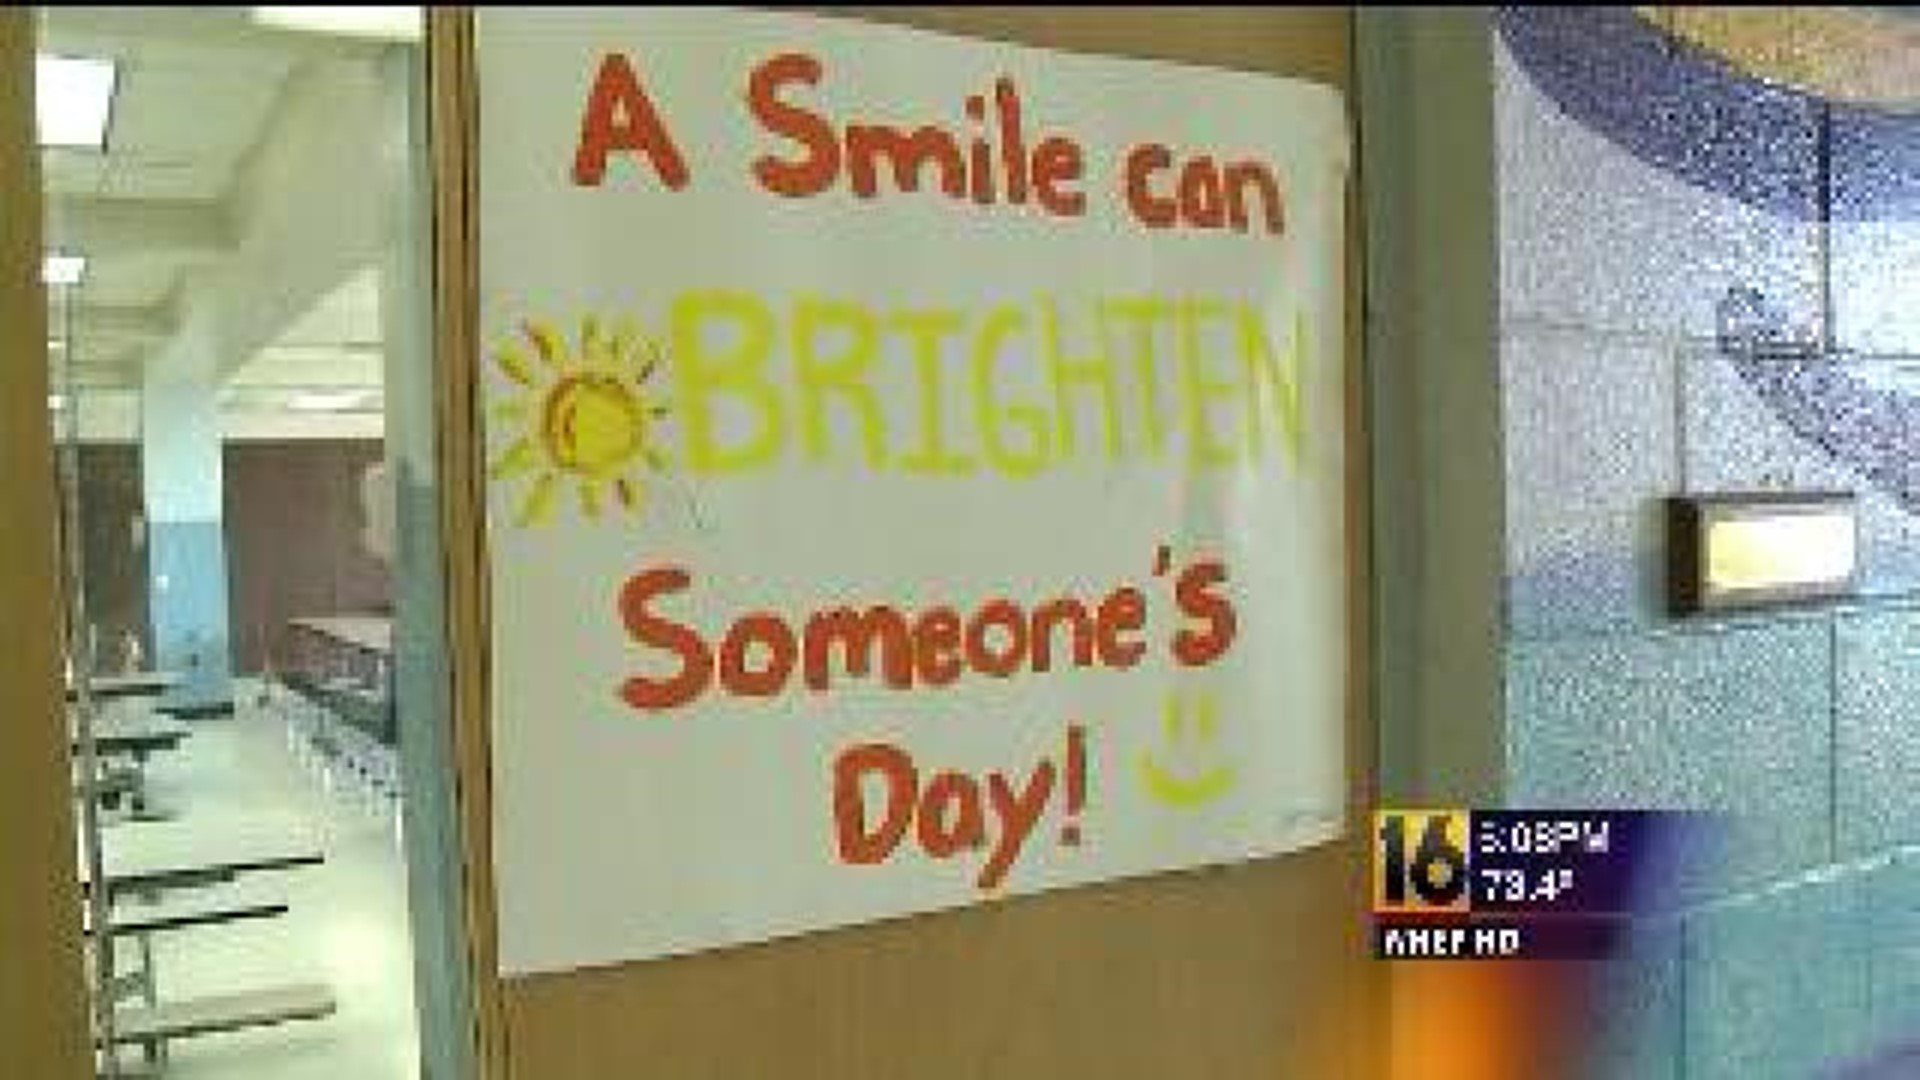 Students’ Message Of Hope Spreads Beyond School Walls